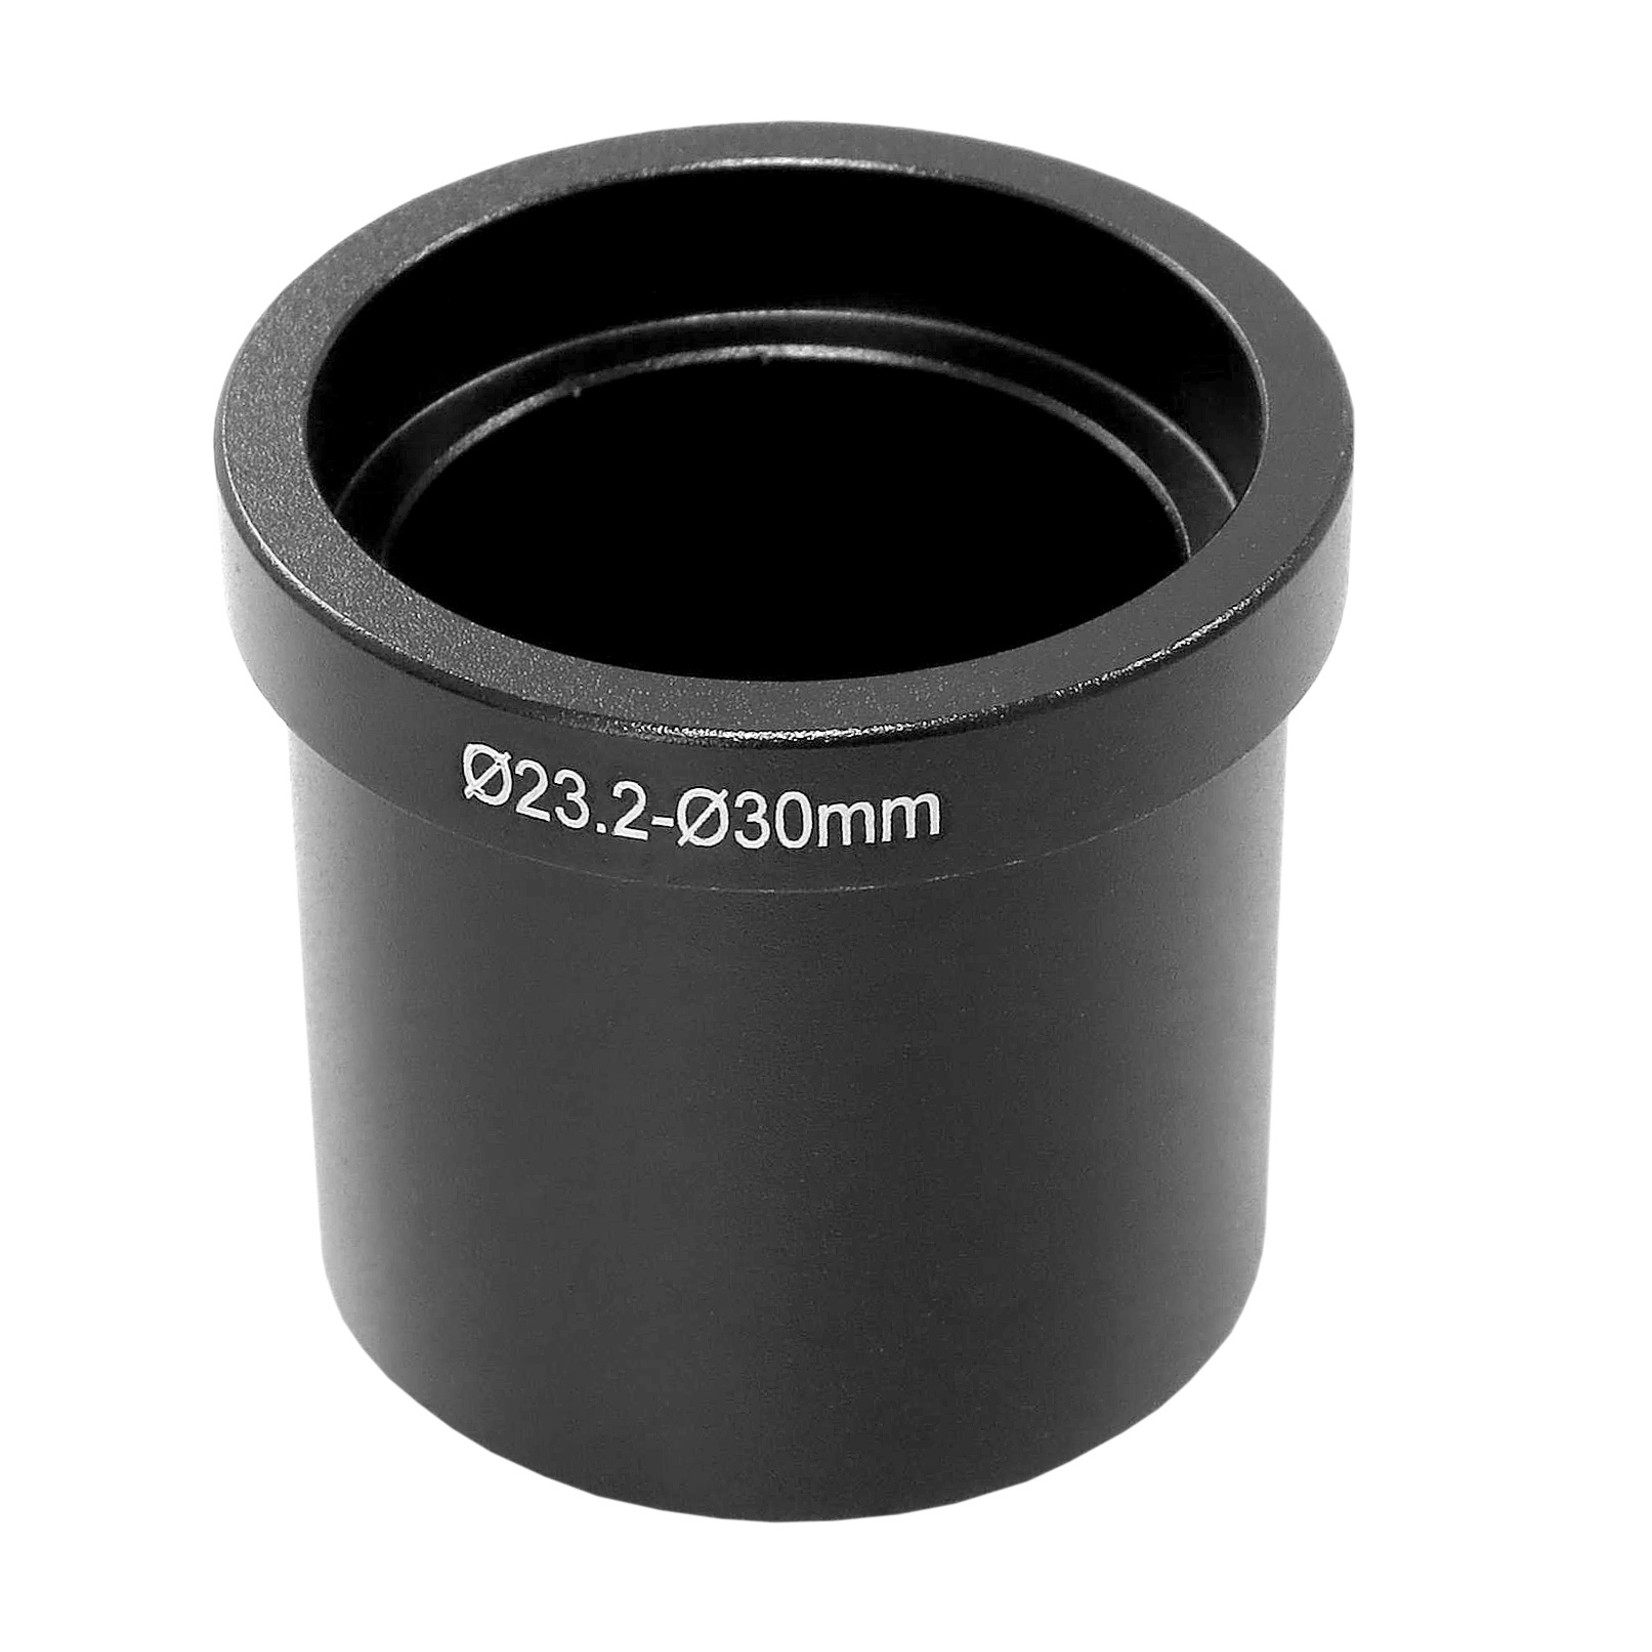 Extension rings for eyepiece adapters